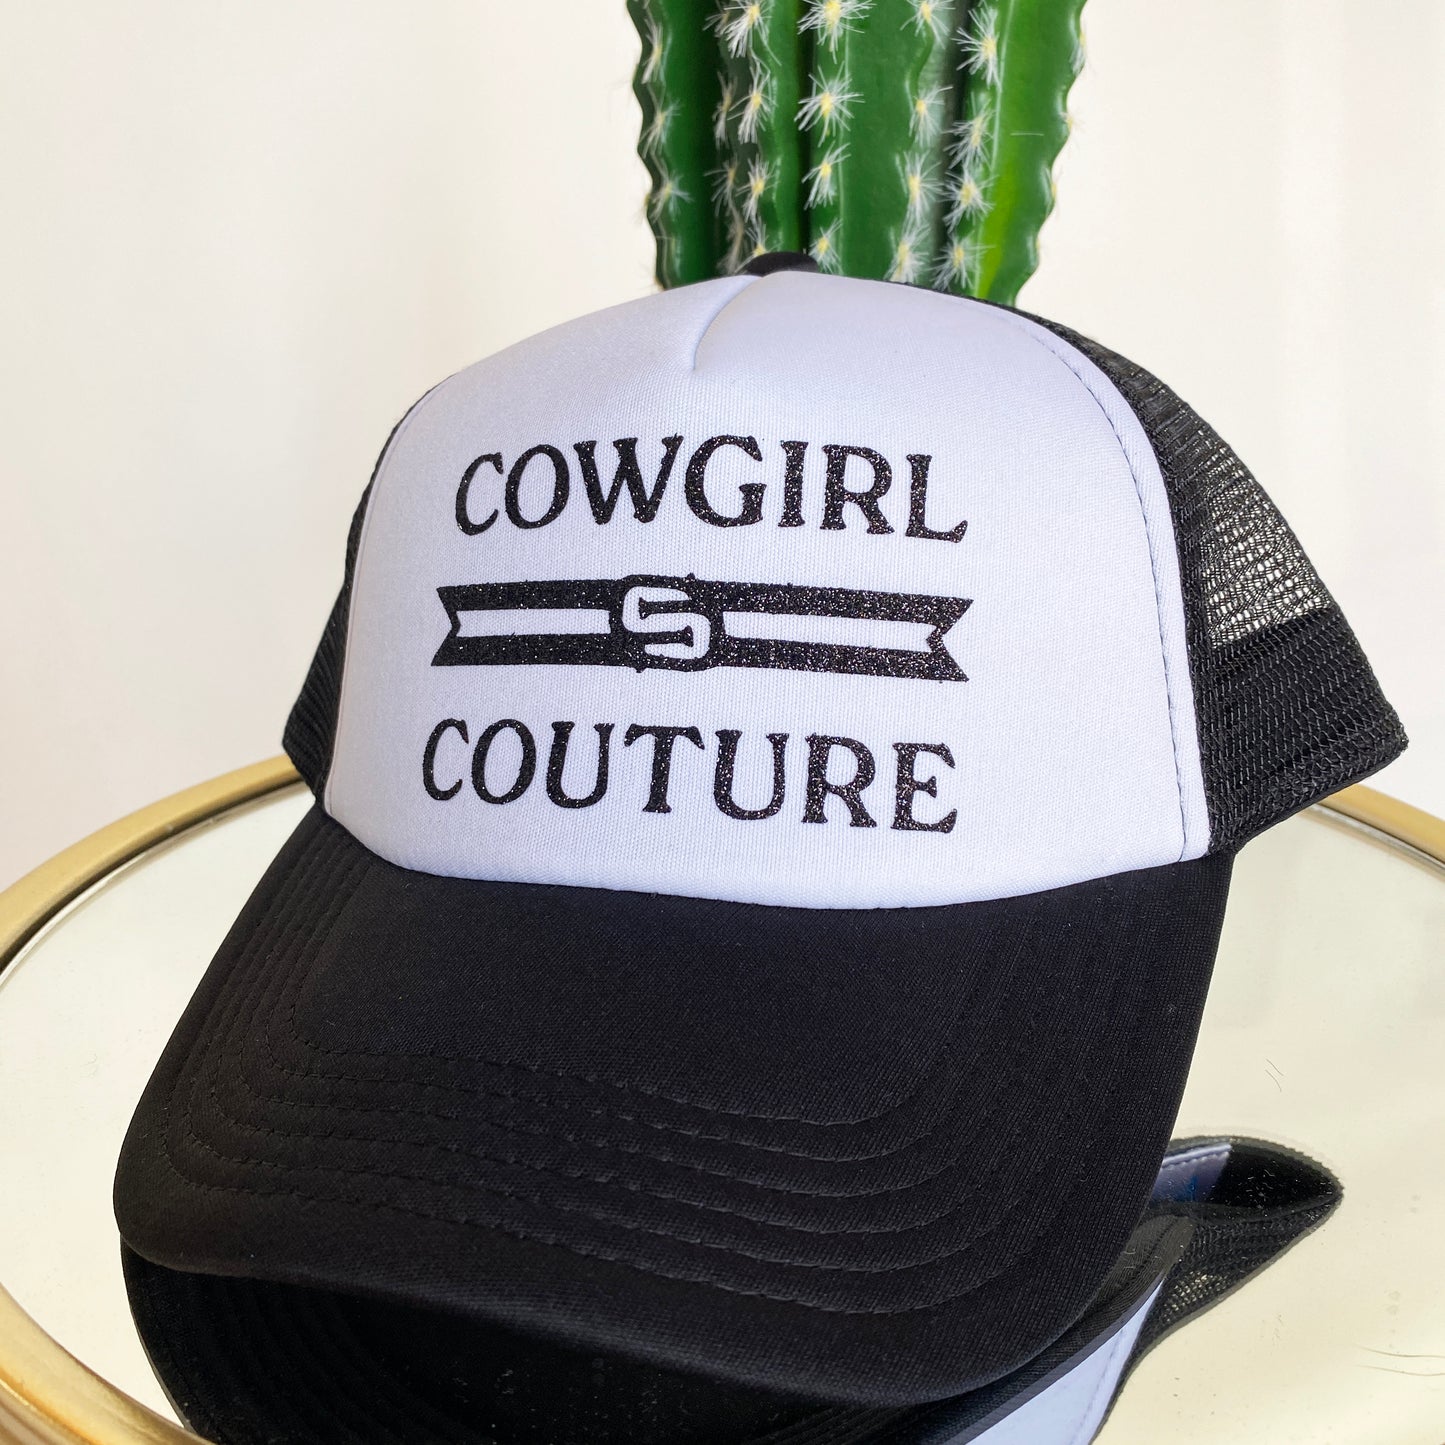 Cowgirl Couture Trucker Hat by Ali Dee - Black and White